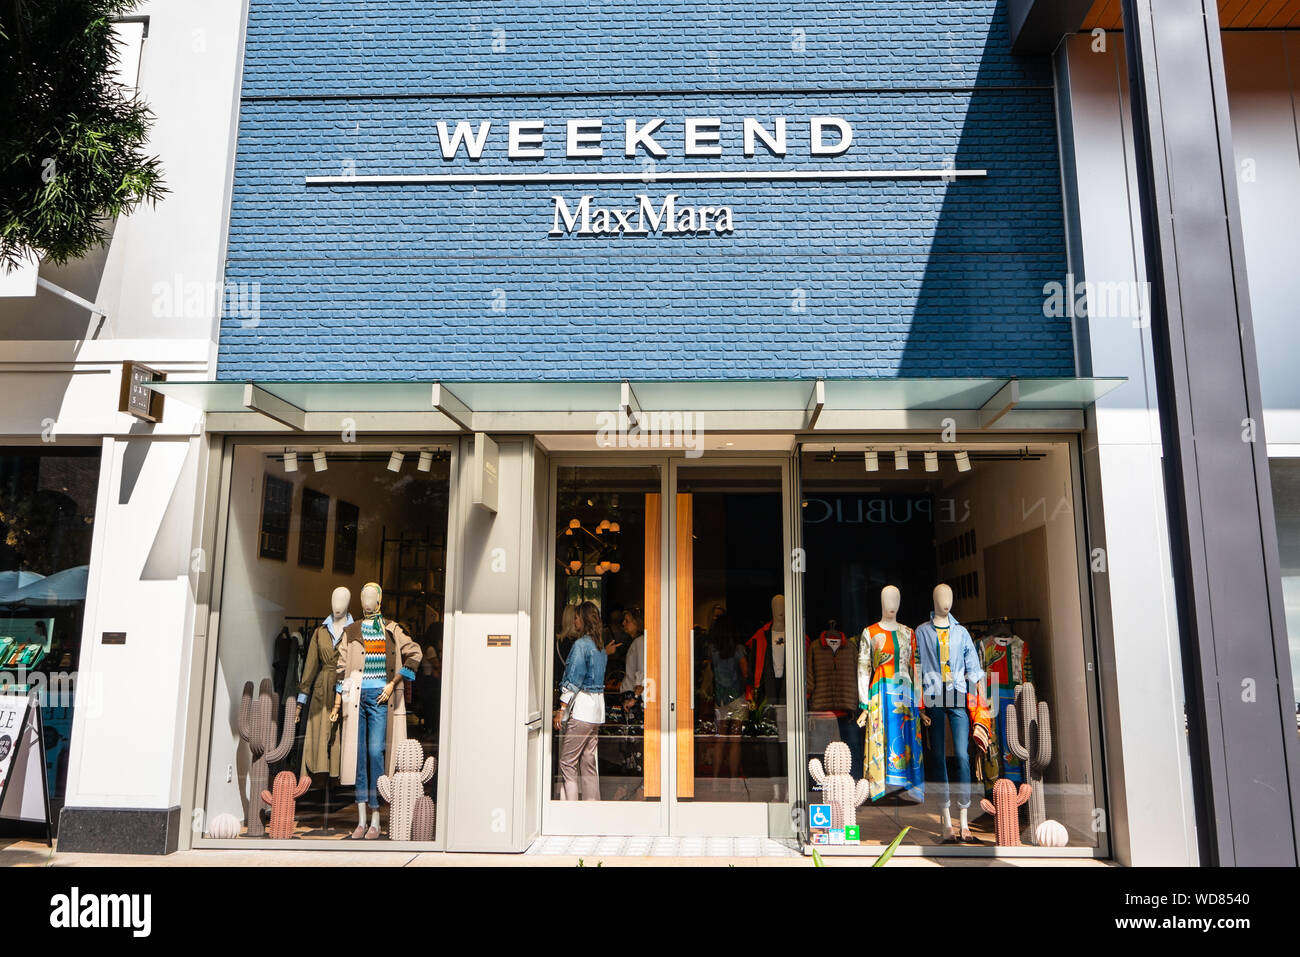 August 28, 2019 Palo Alto / CA / USA - Weekend MaxMara store located in  Stanford Shopping Mall in San Francisco bay area Stock Photo - Alamy